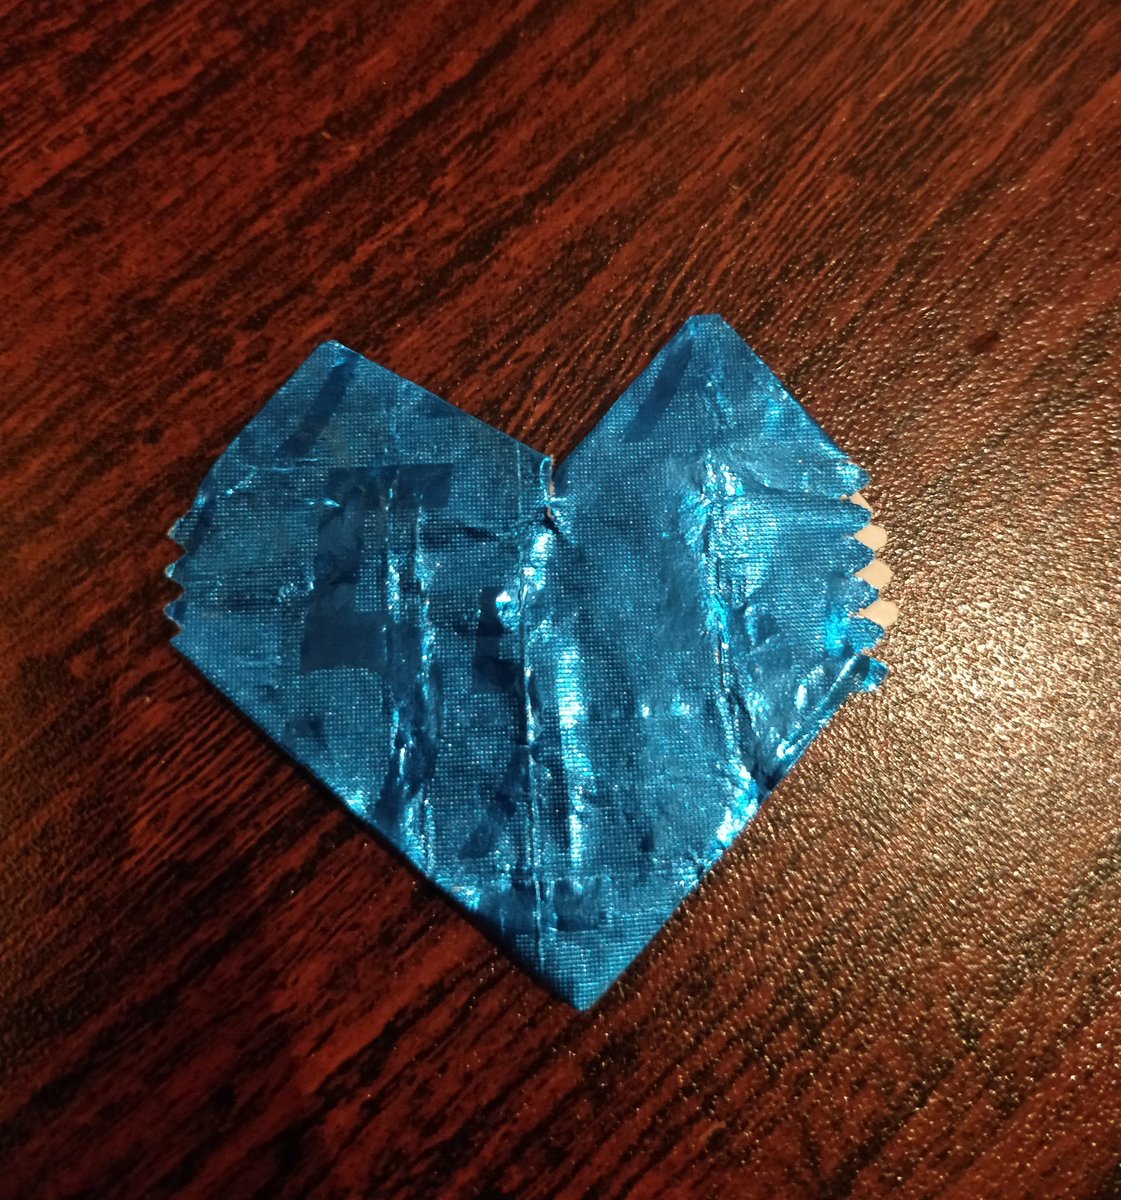 How To Make A Heart Out Of A Gum Wrapper Step By Step How Do You Make A Heart Out Of Gum Wrapper